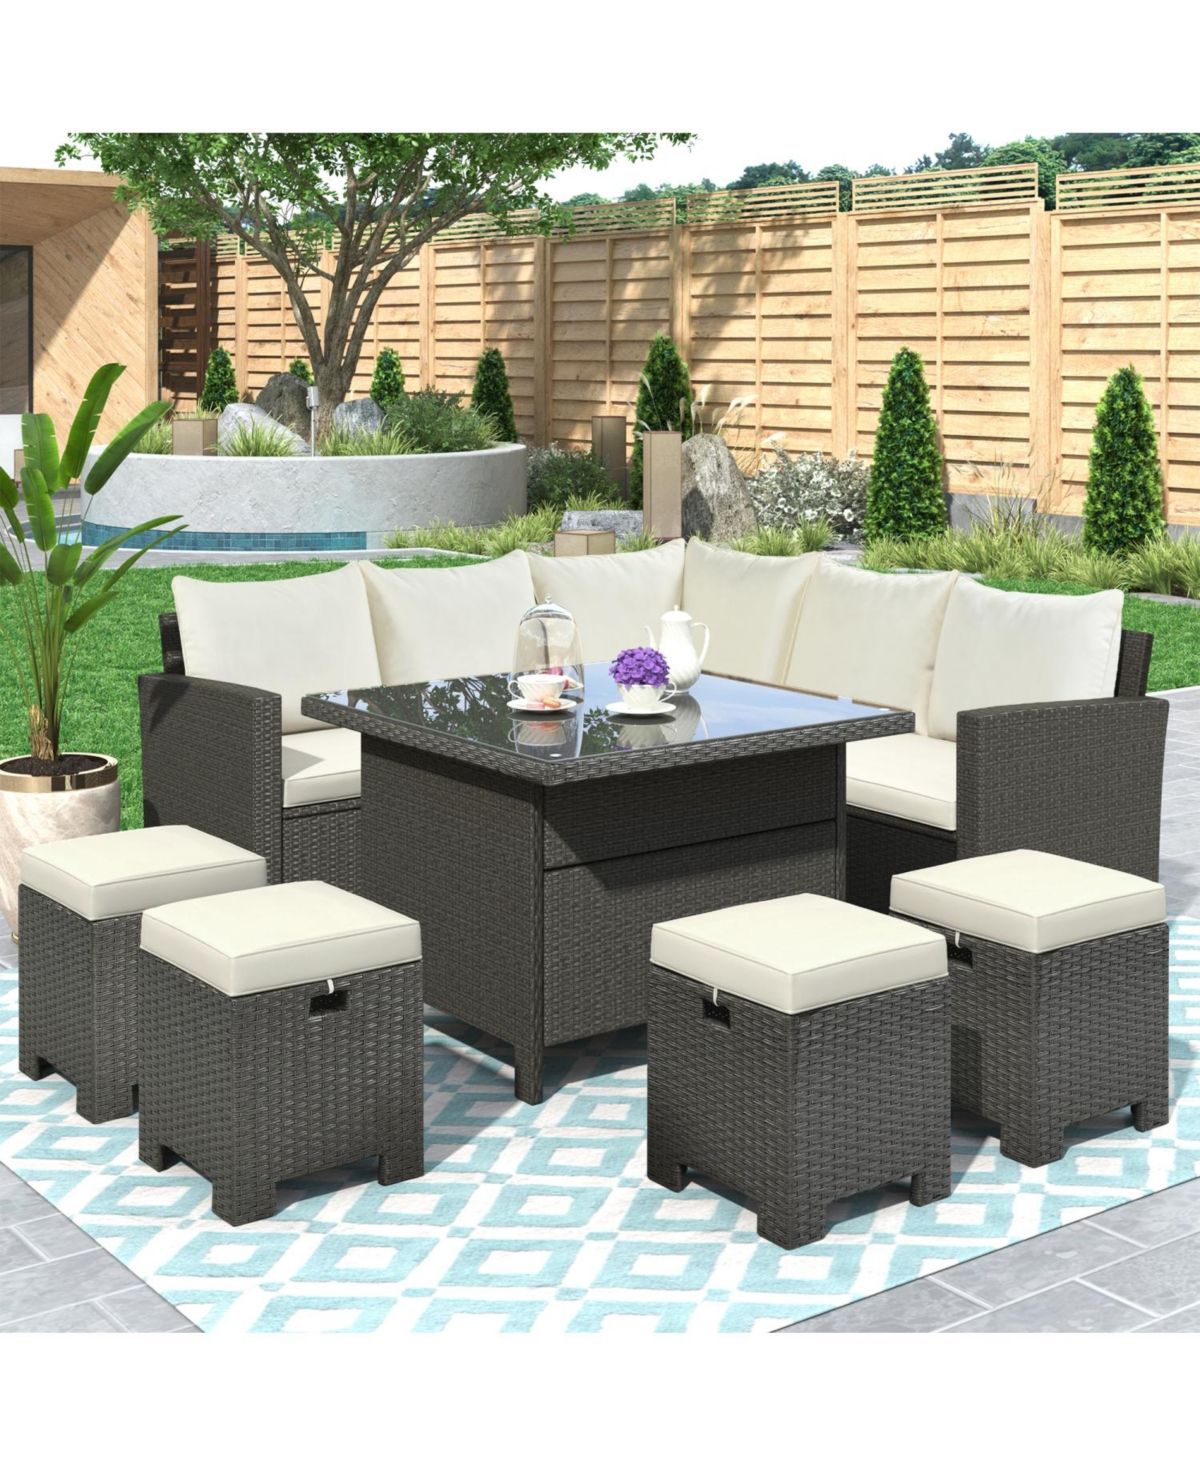 Patio Furniture Set, 8 Piece Outdoor Conversation Set, Dining Table Chair  With Ottoman, Cushions Pertaining To 8 Piece Patio Rattan Outdoor Furniture Set (View 14 of 15)